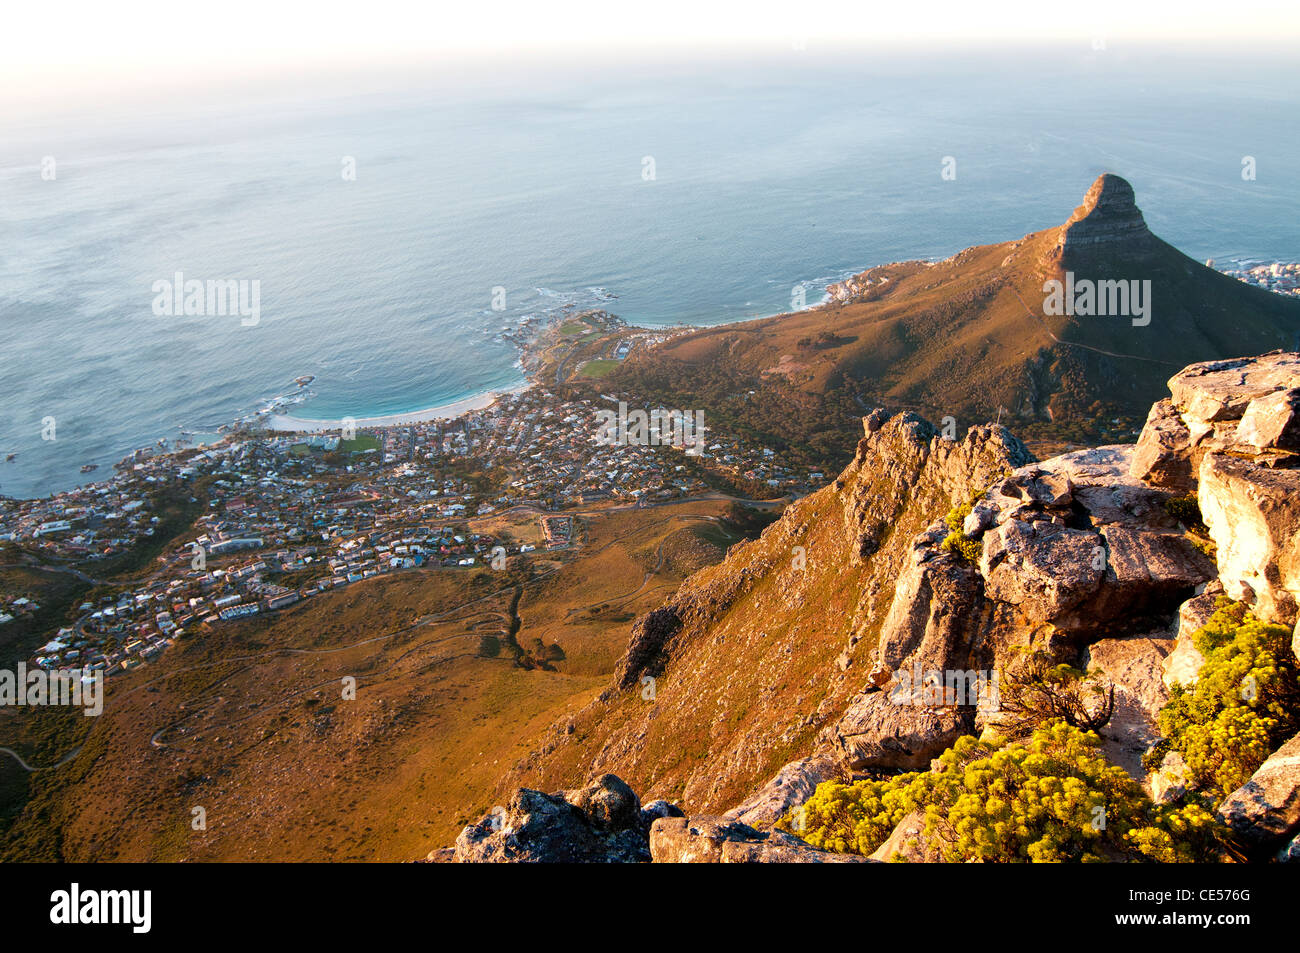 View of Camps Bay and Lion's Head from Table Mountain, Cape Town, South Africa Stock Photo